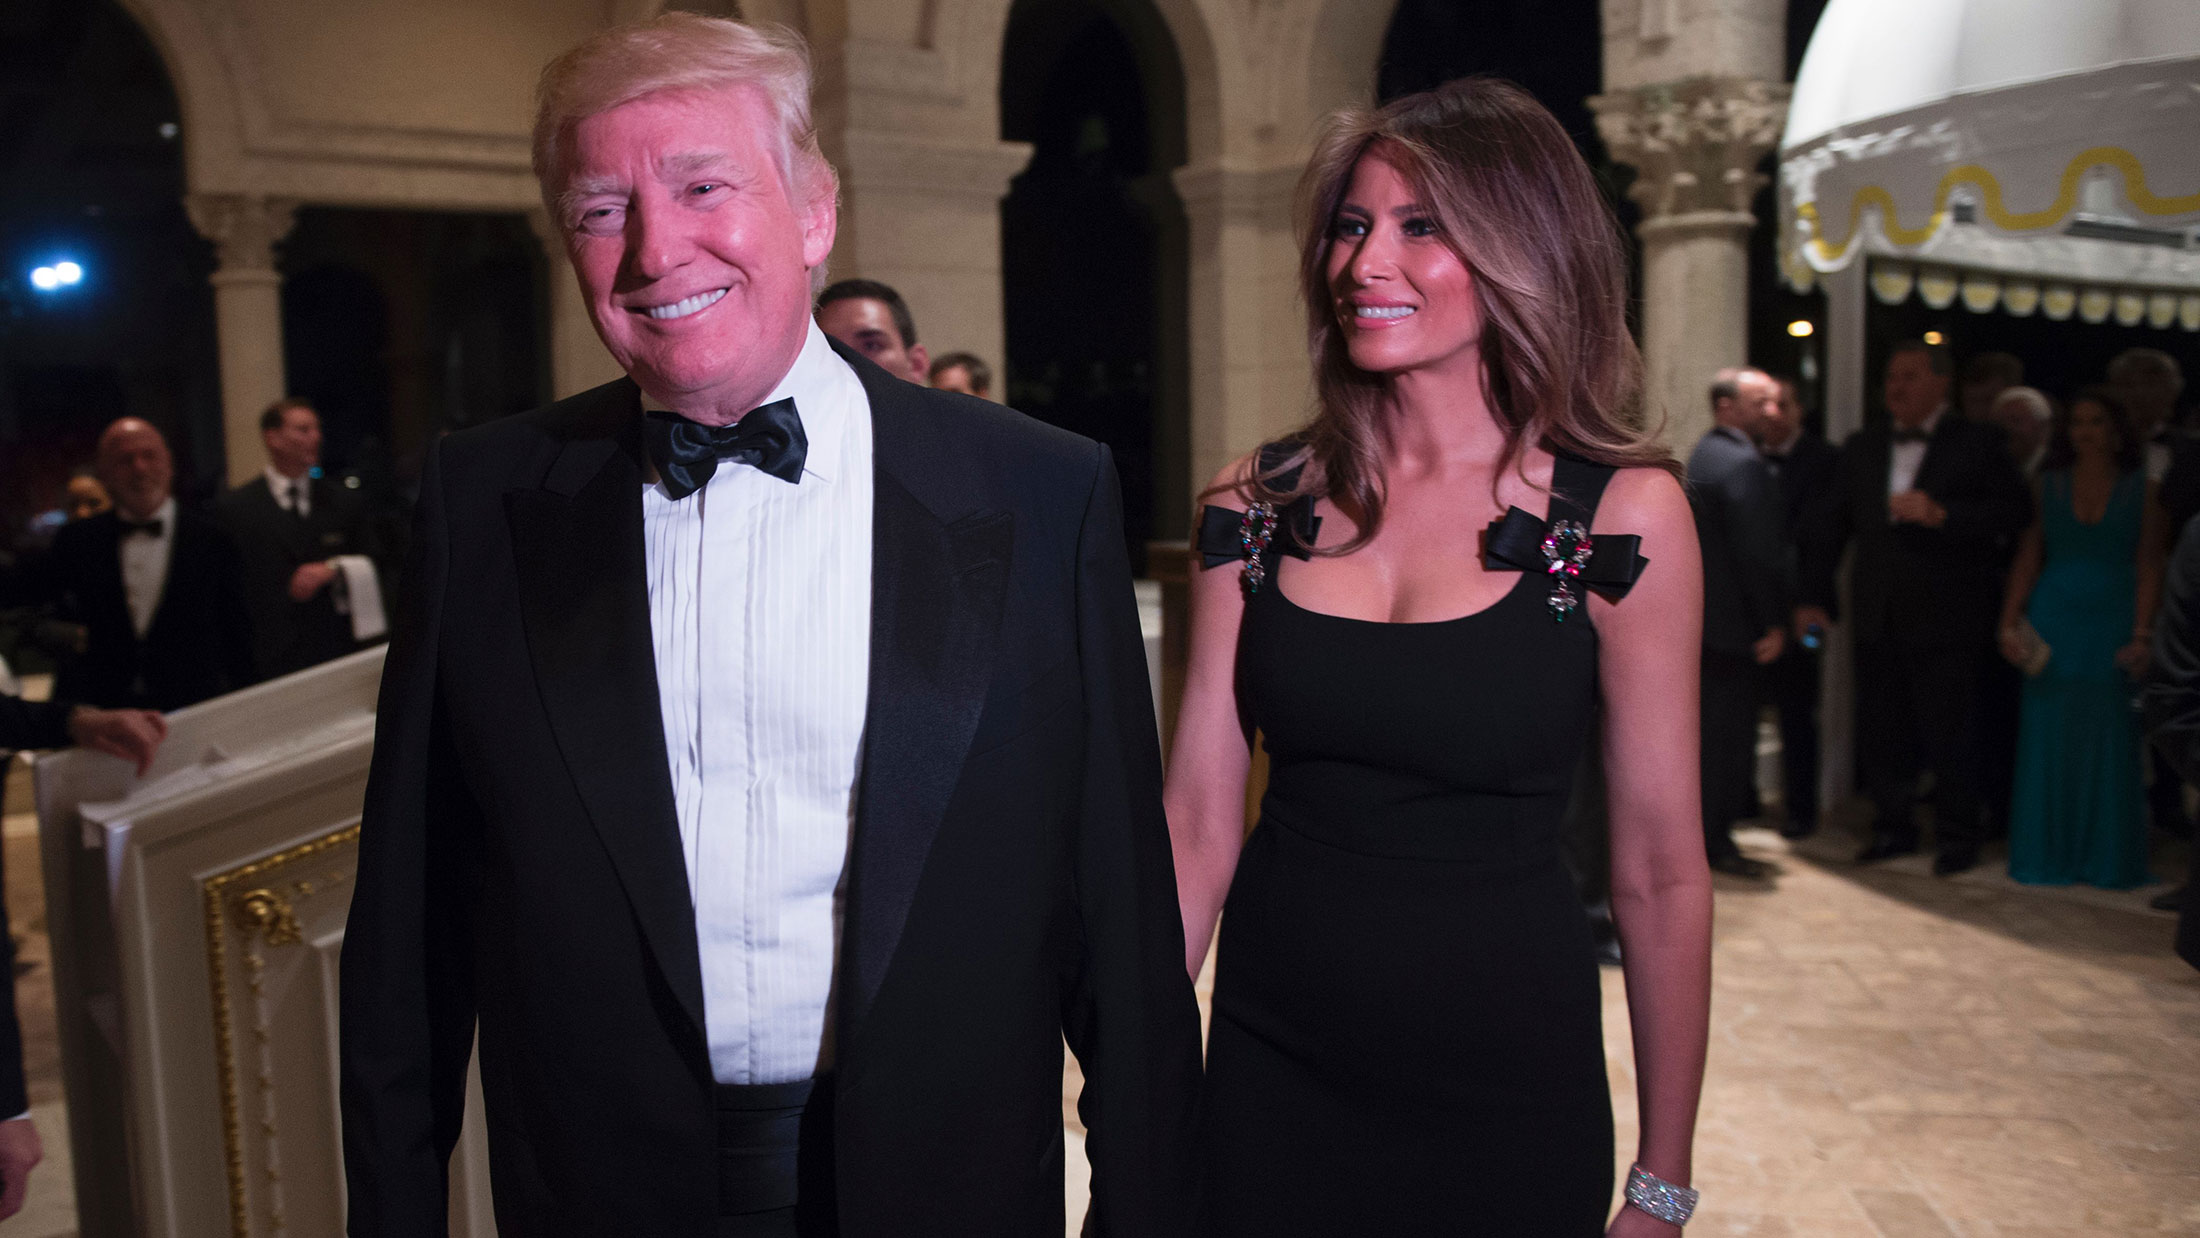 President-elect Donald Trump arrives with his wife, Melania, for a New Year's Eve party on Dec. 31, 2016, at Mar-a-Lago in Palm Beach, Florida.
